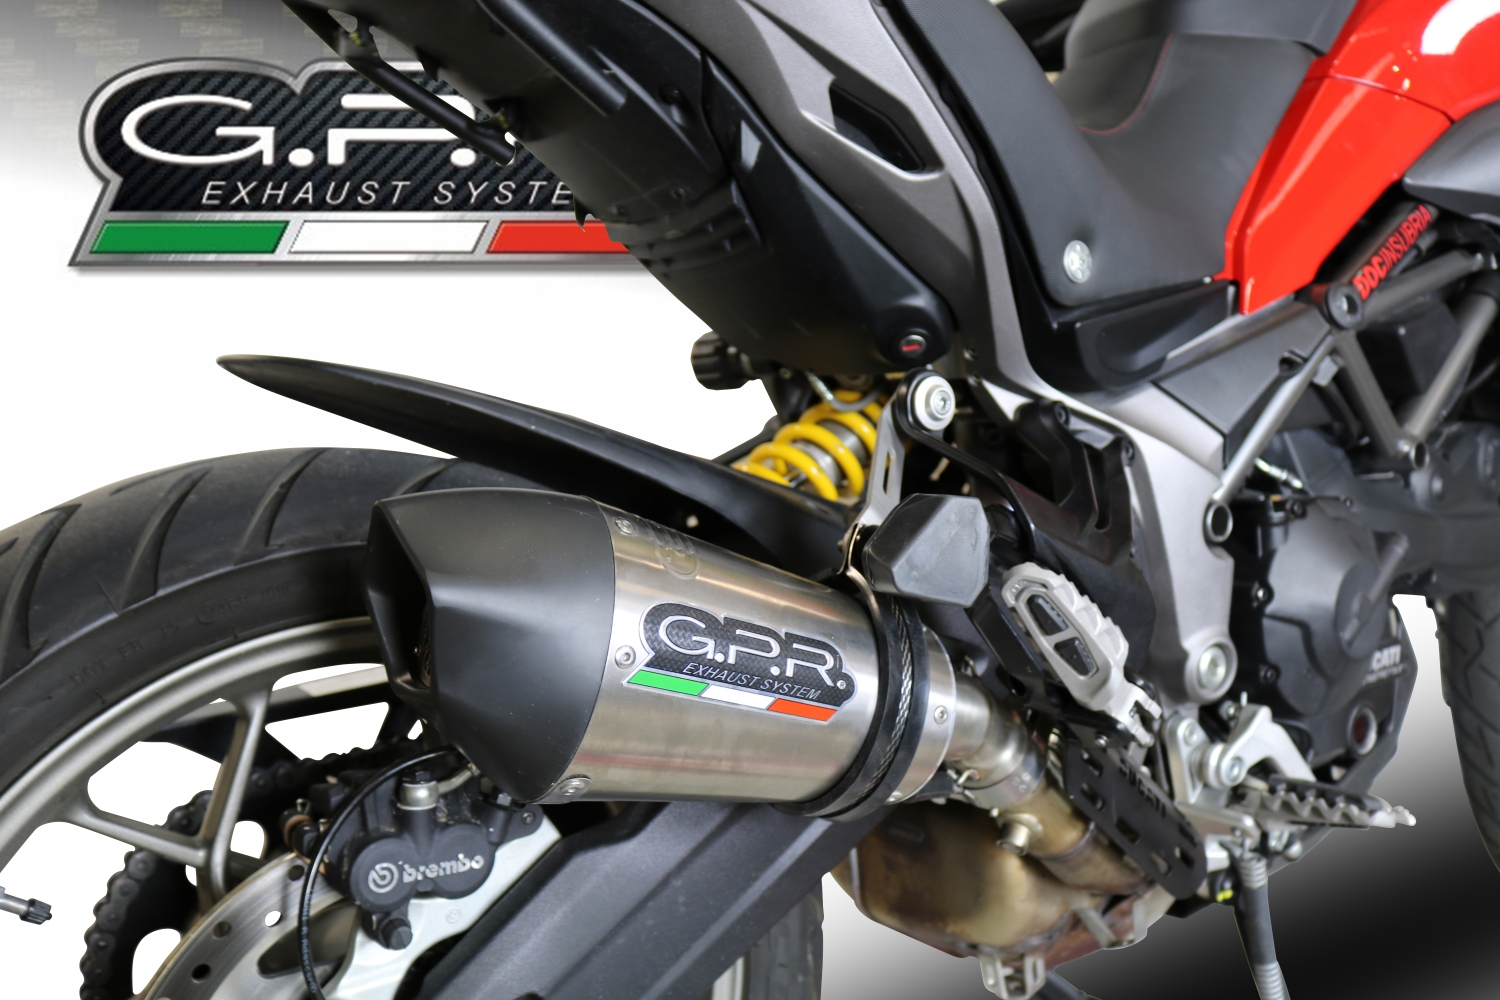 Exhaust system compatible with Ducati Multistrada 950 V2 S 2021-2024, GP Evo4 Titanium, Homologated legal slip-on exhaust including removable db killer and link pipe 